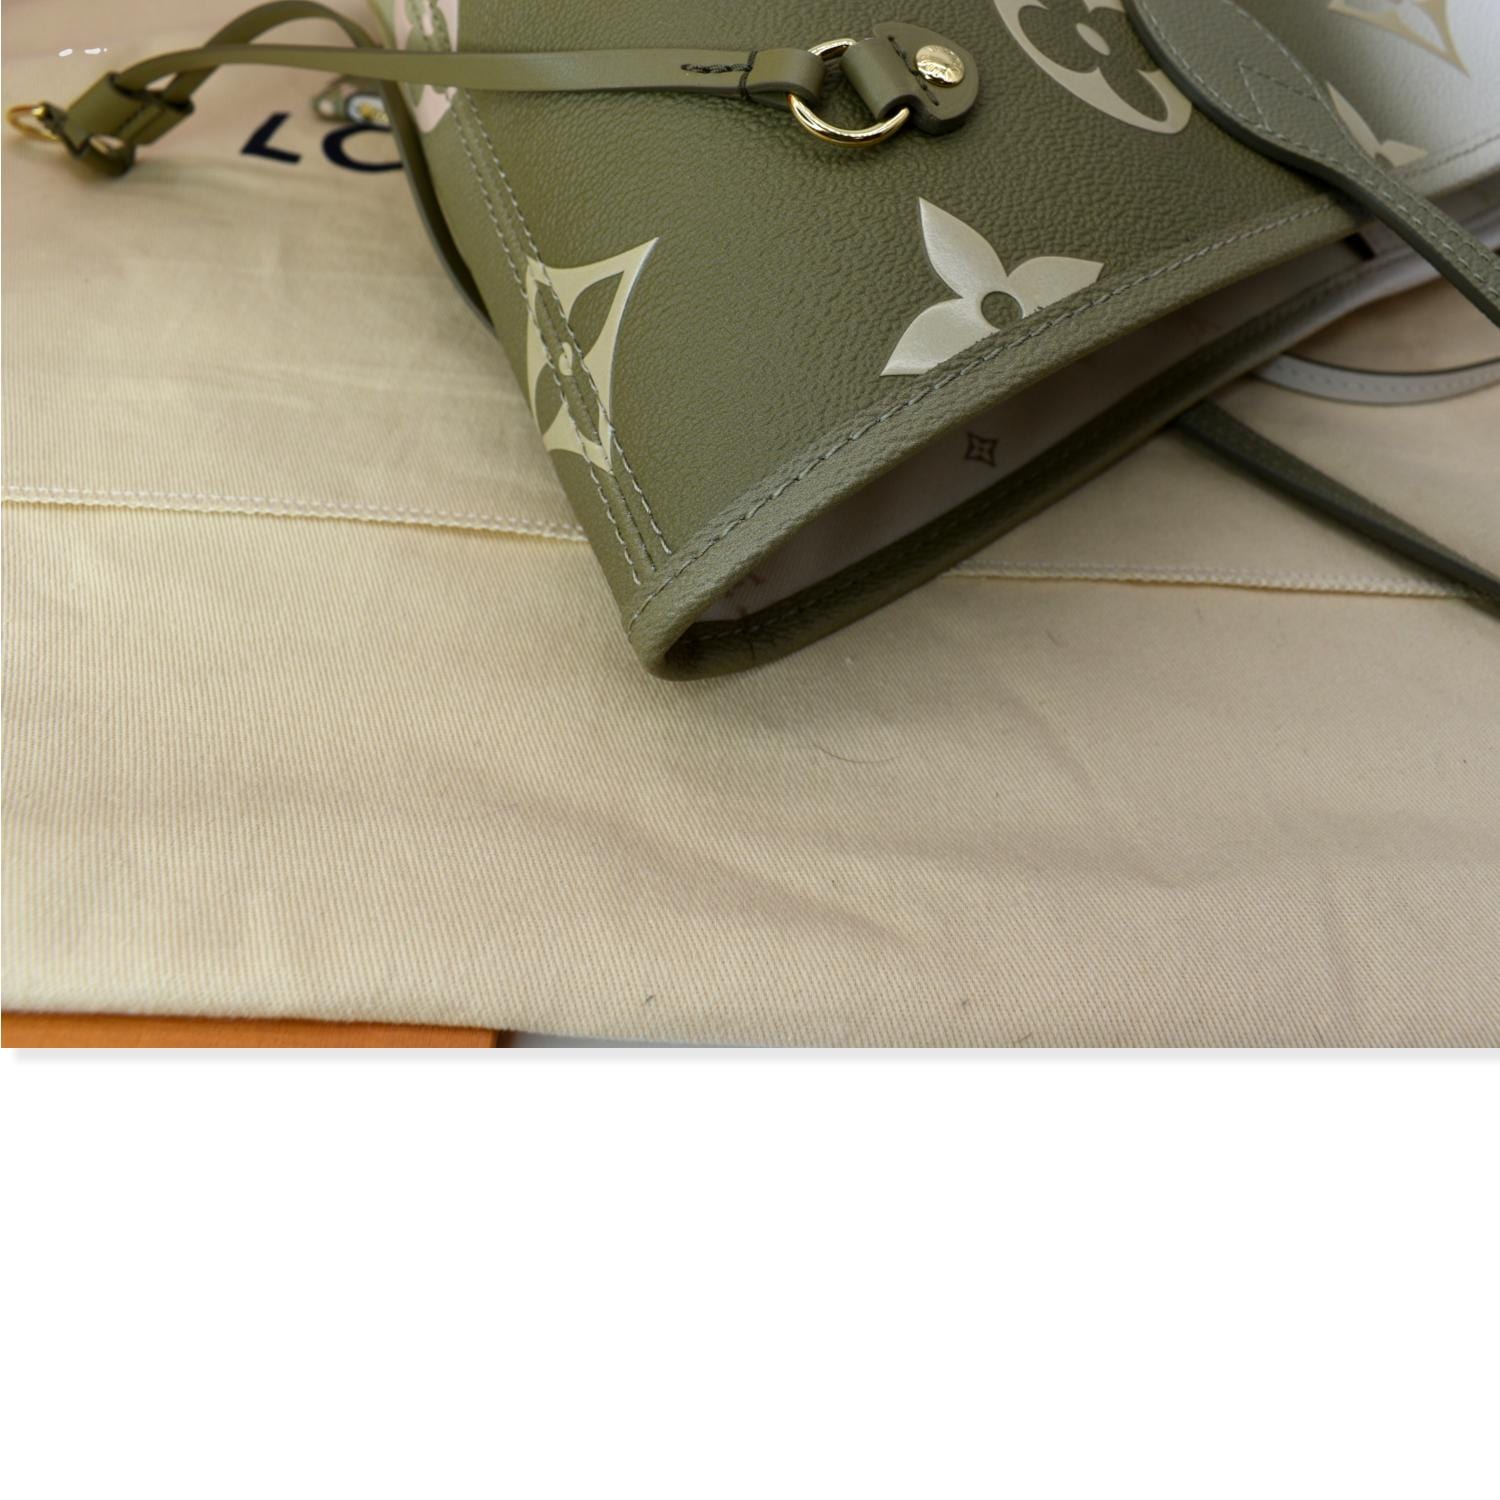 Louis Vuitton Monogram Sunset Khaki Neverfull MM Tote Bag with Pouch  81lz418s For Sale at 1stDibs